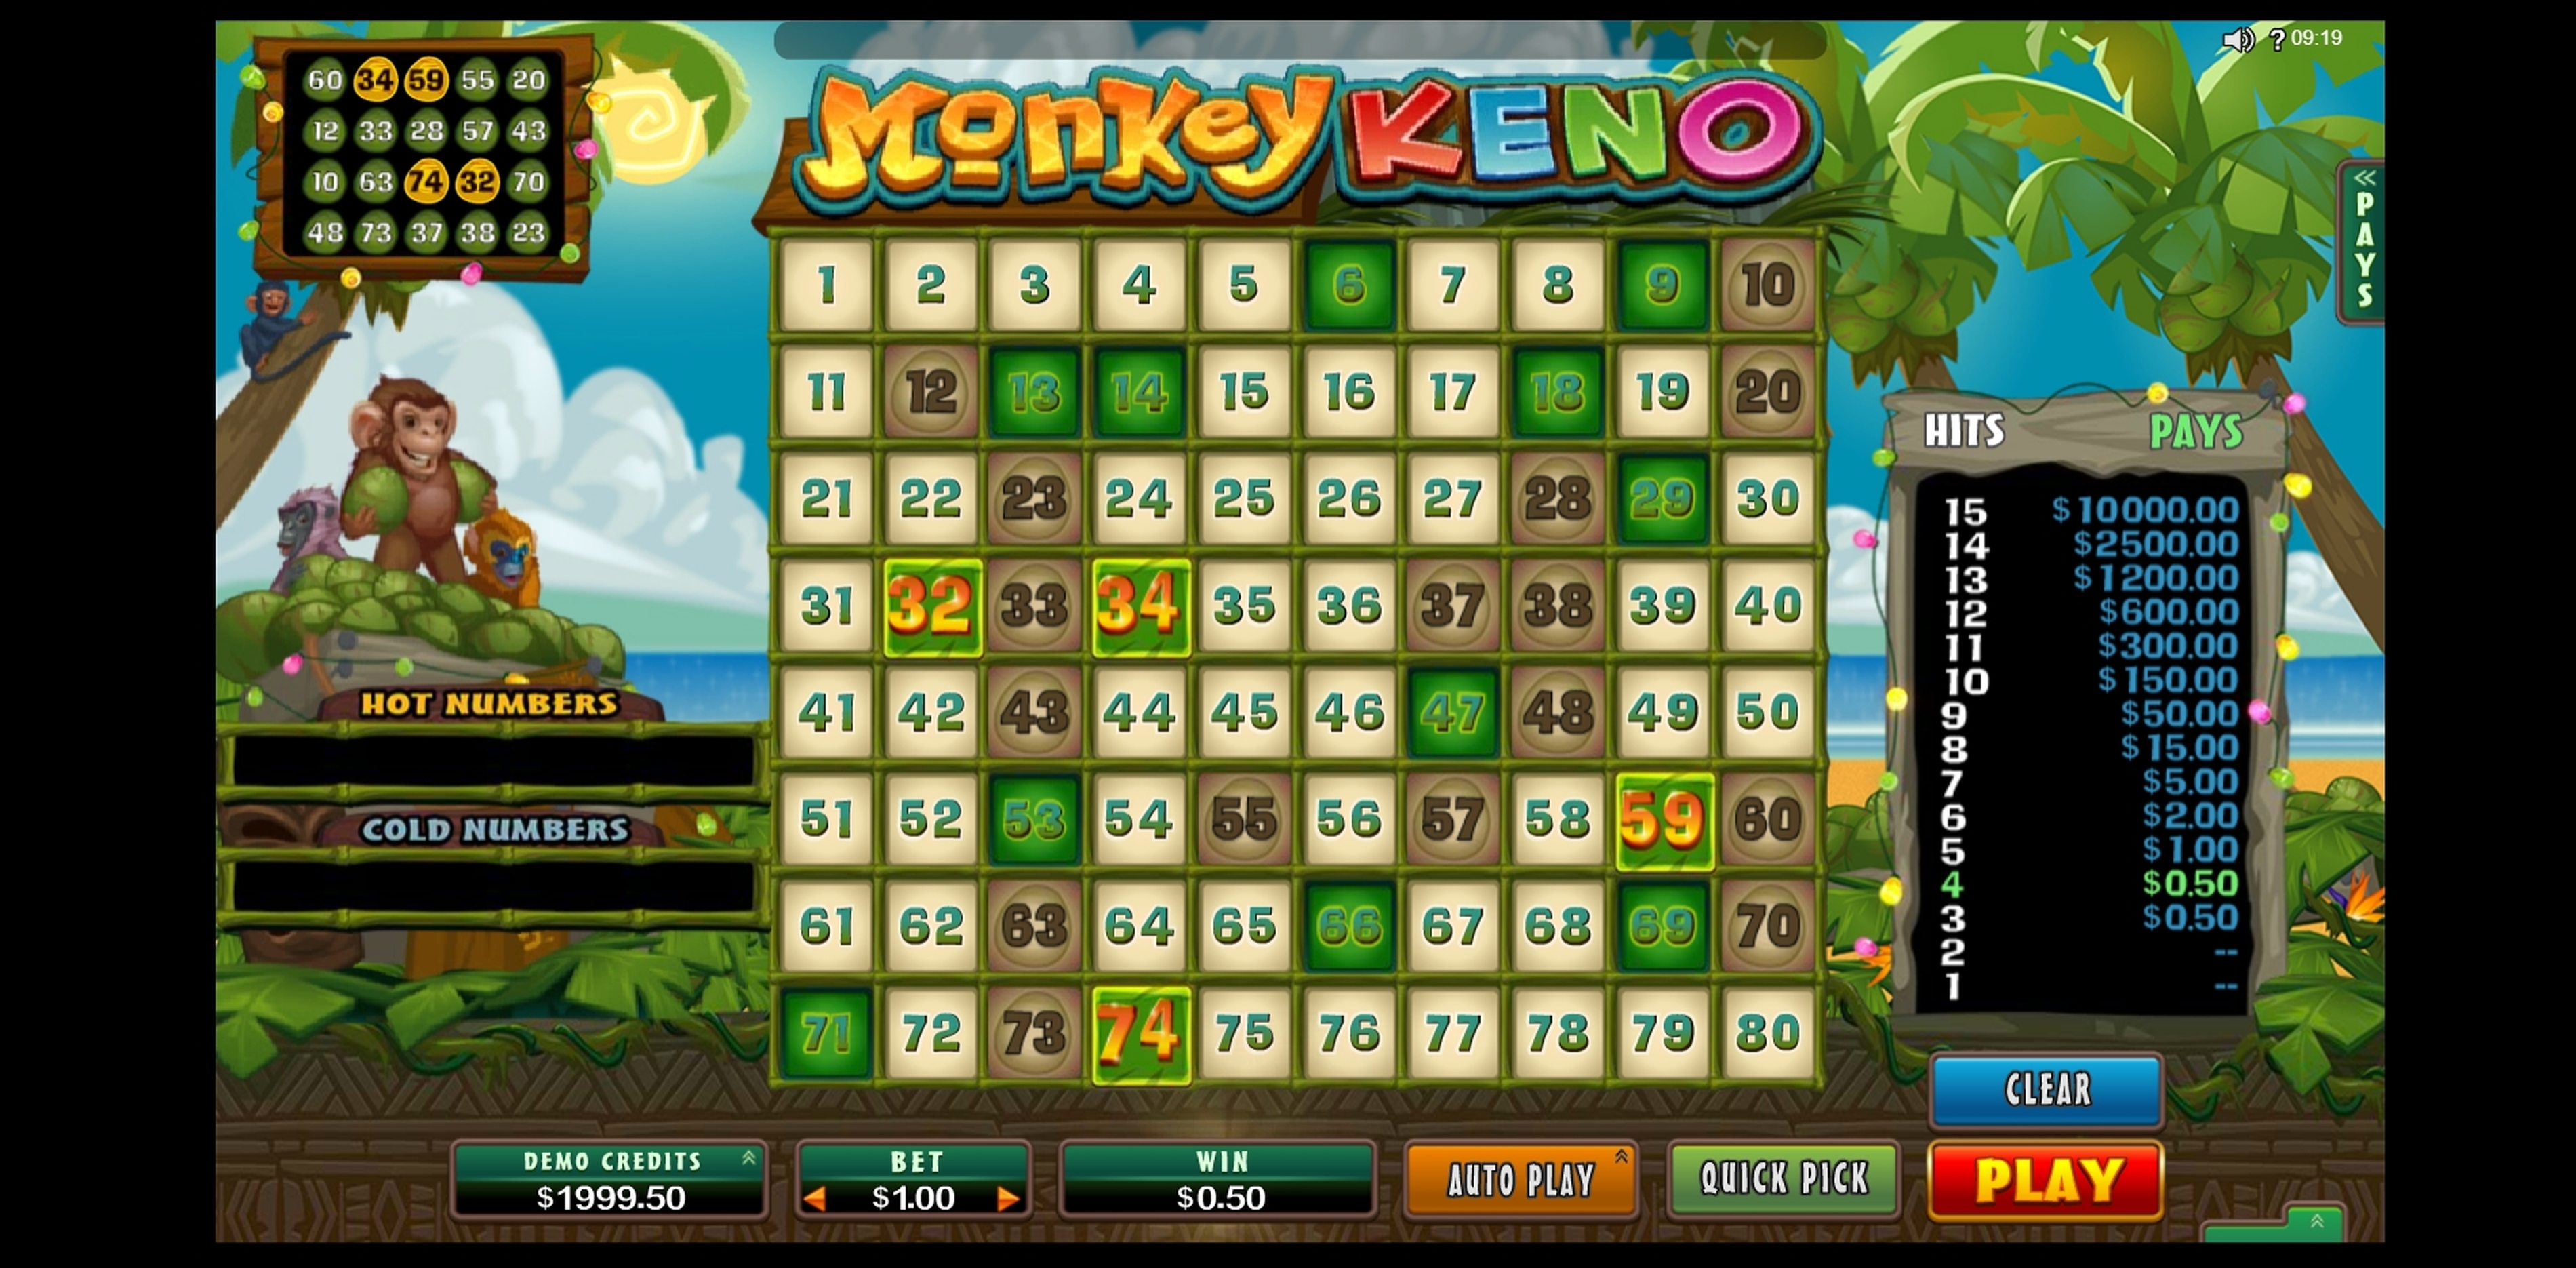 Win Money in Monkey Keno Free Slot Game by Microgaming